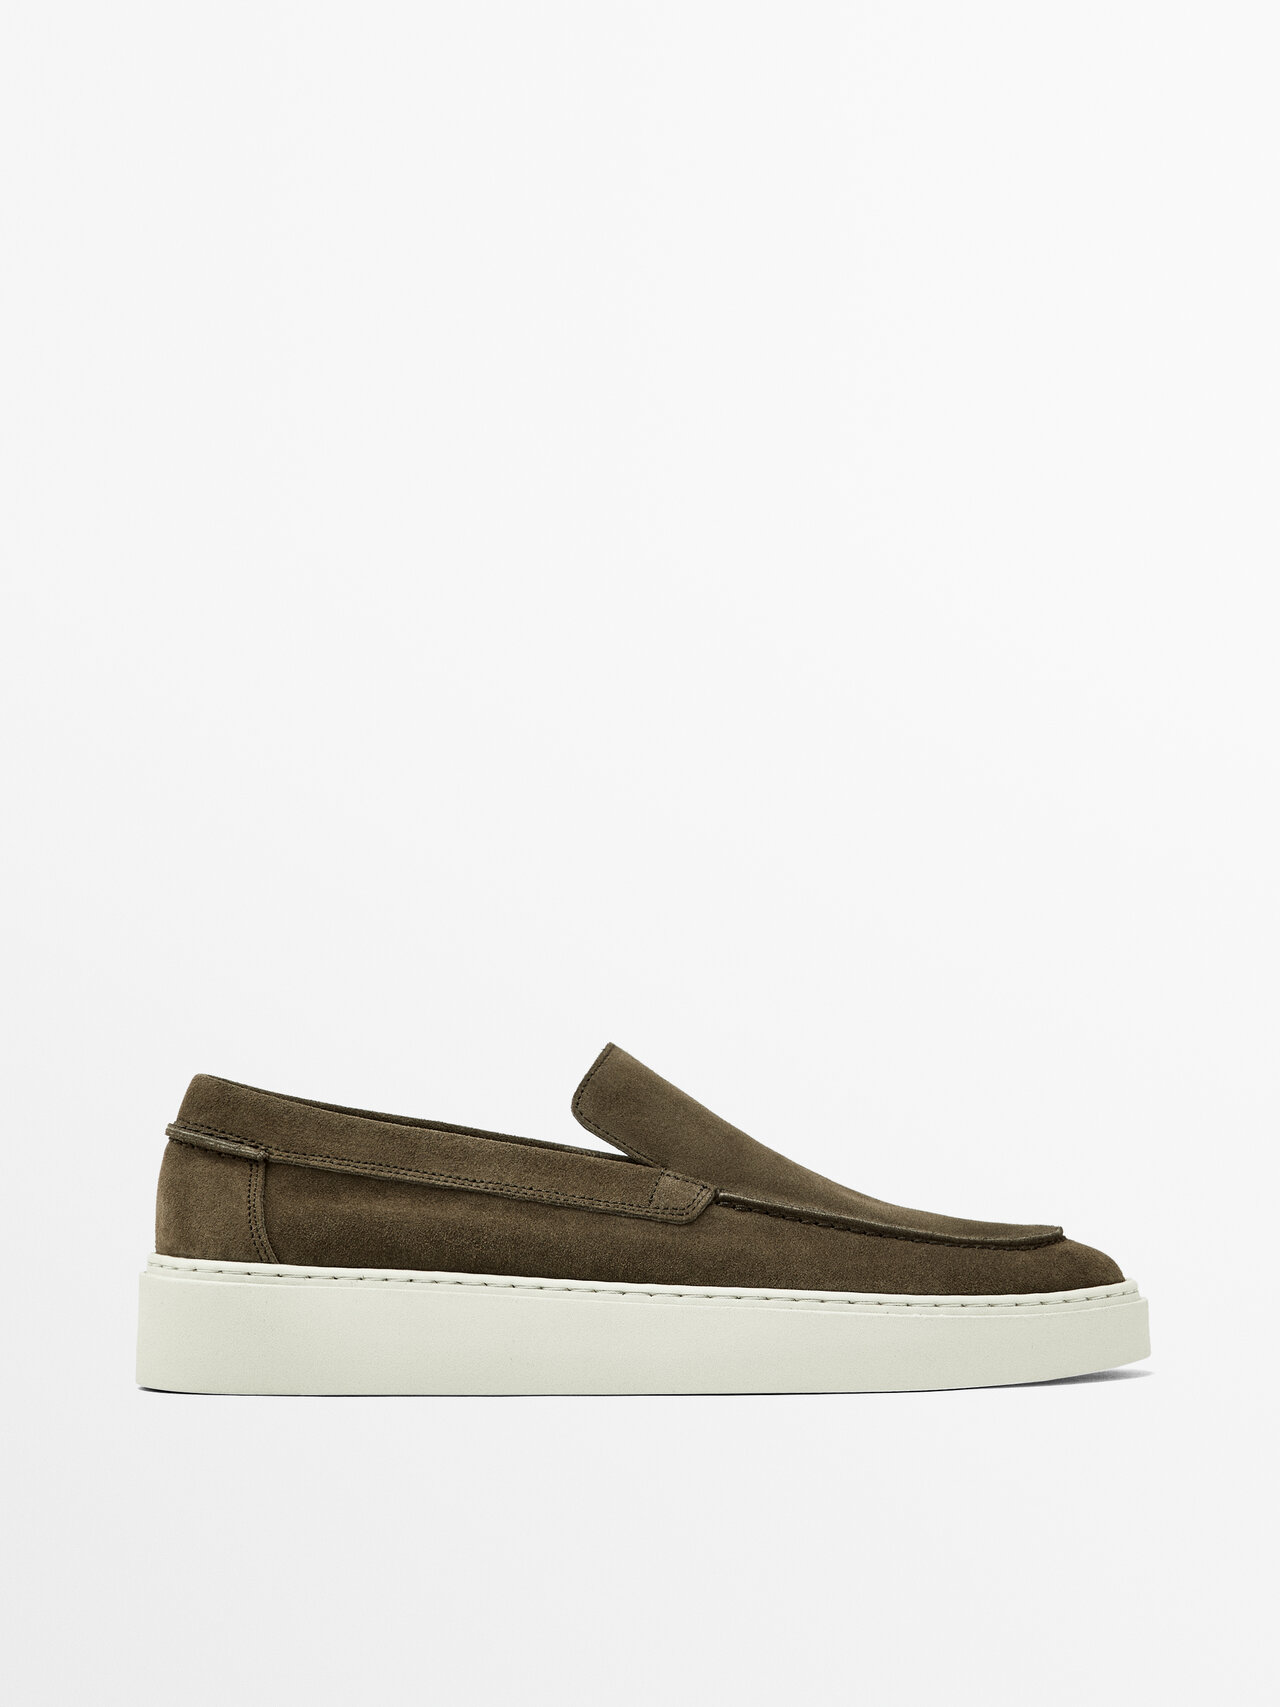 Massimo Dutti Split Suede Loafers In Mink